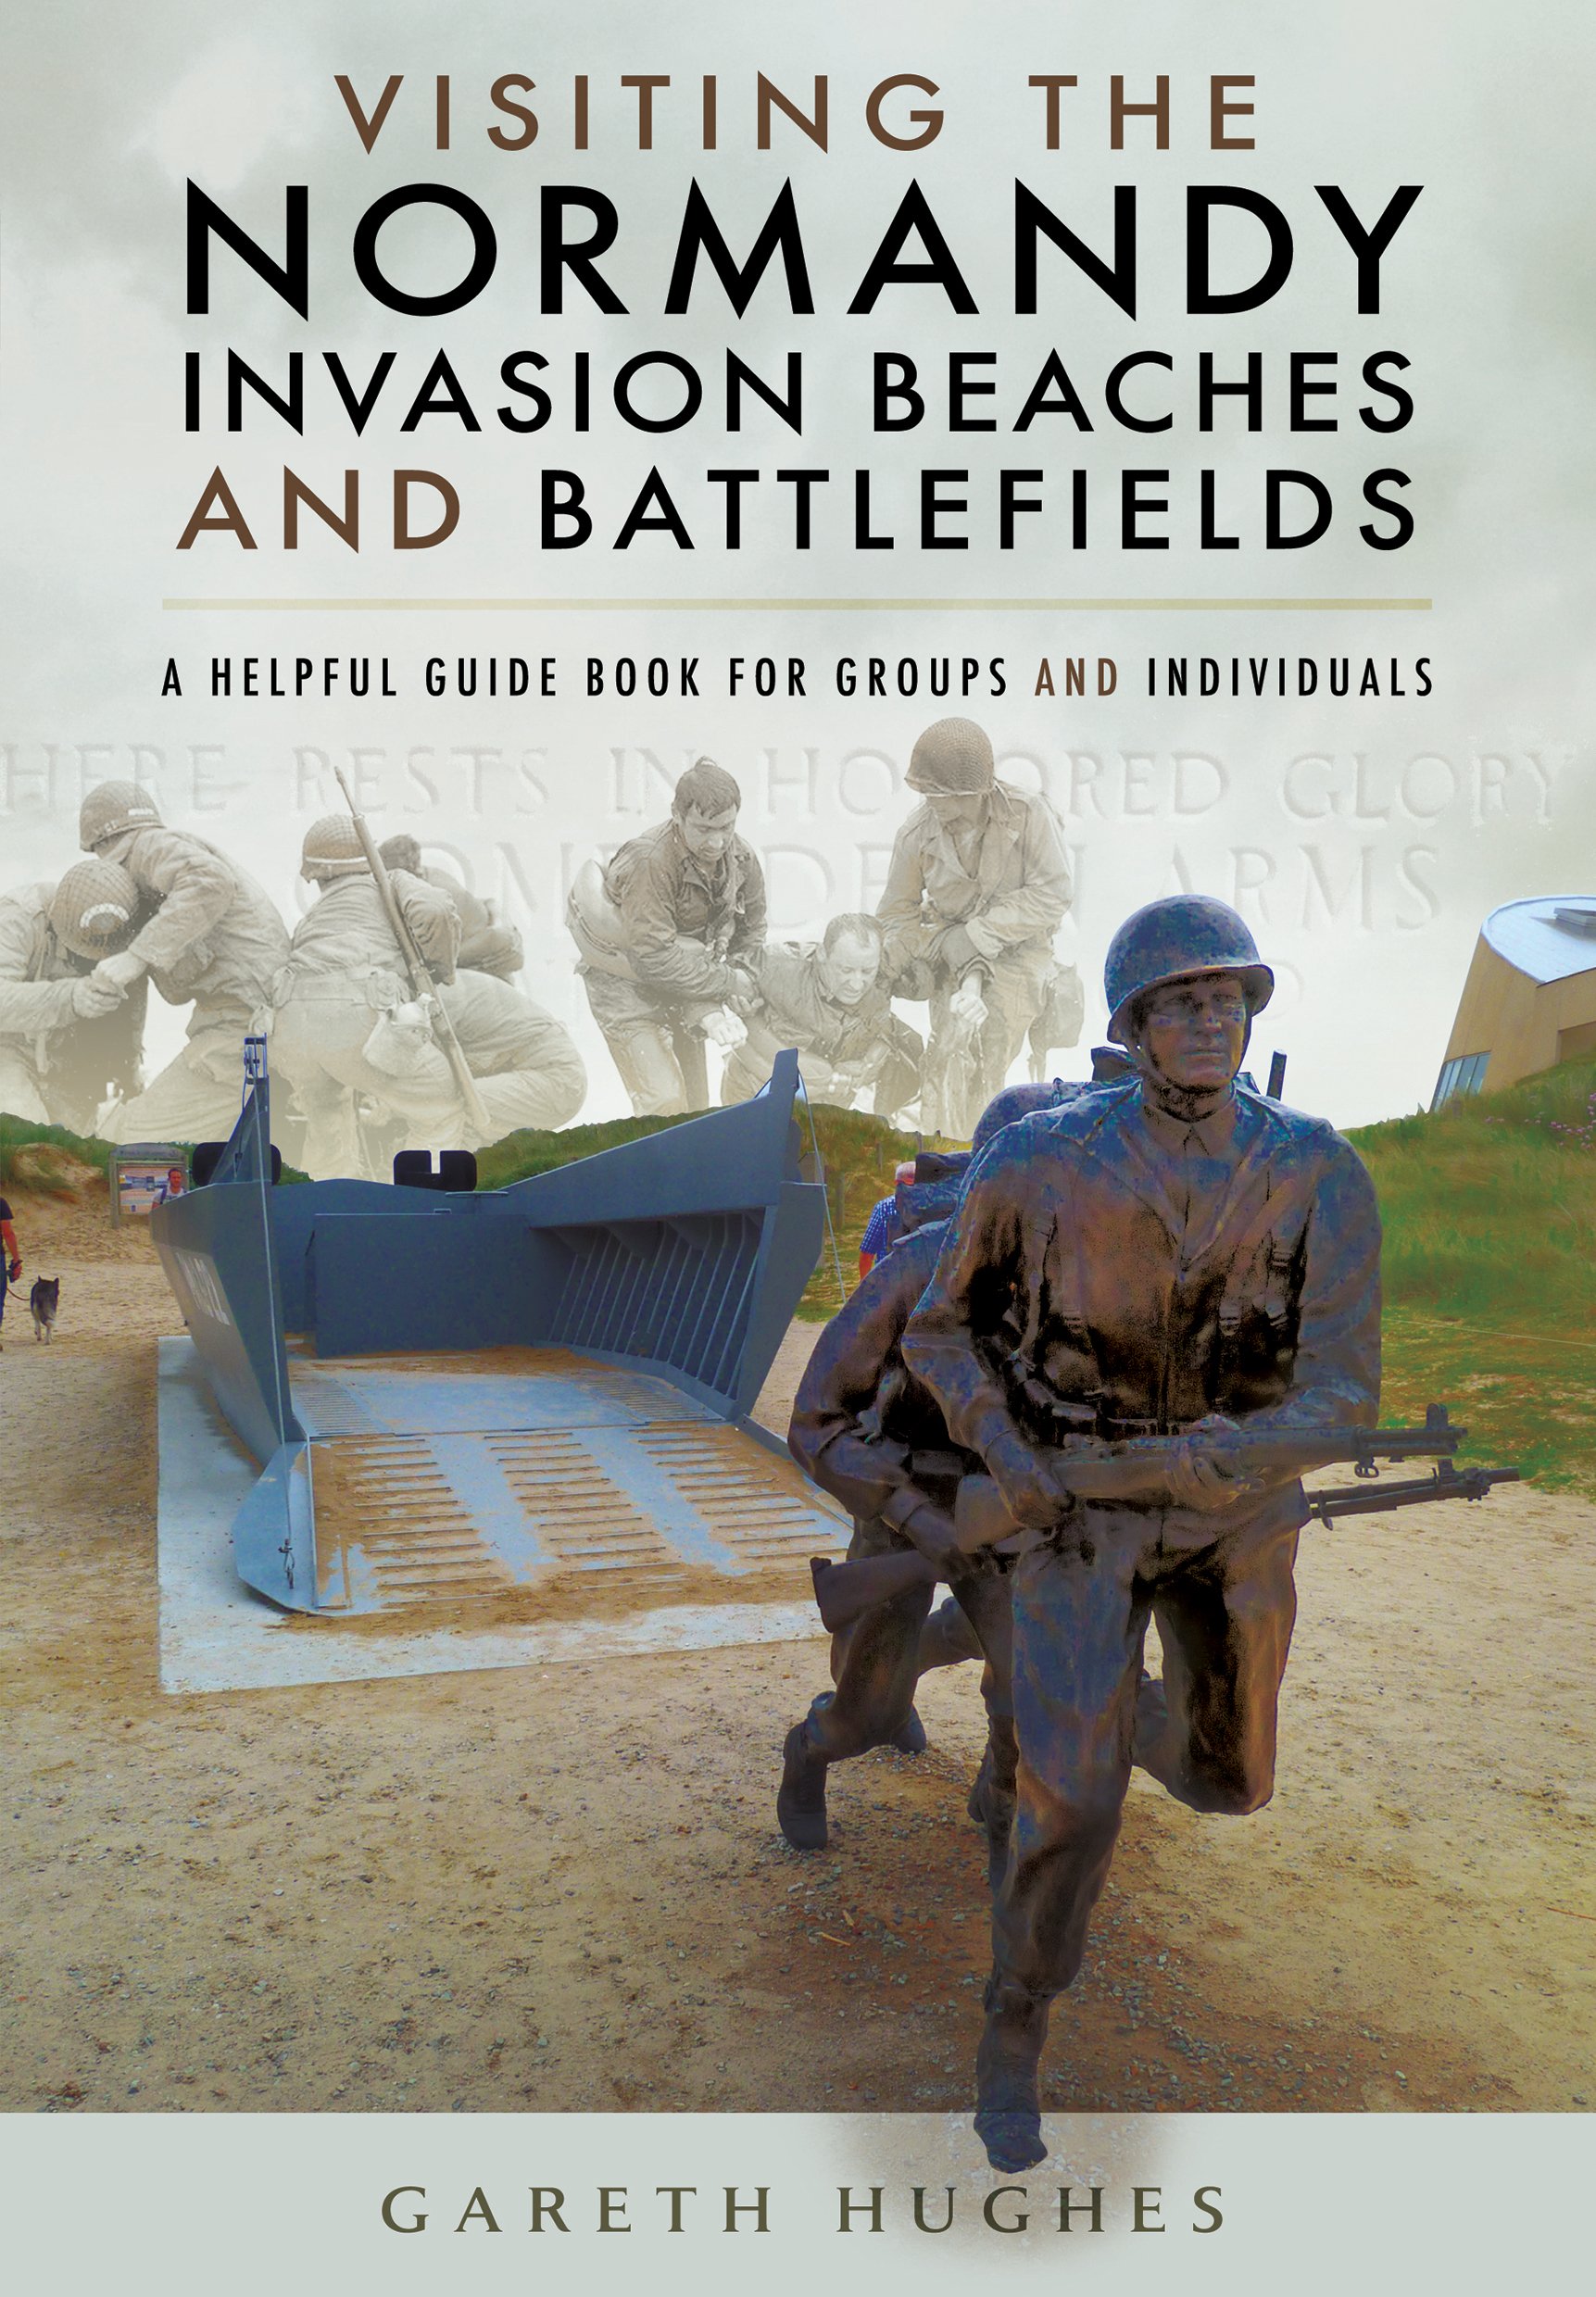 Book Cover of Statues running onto the beach of Normandy.